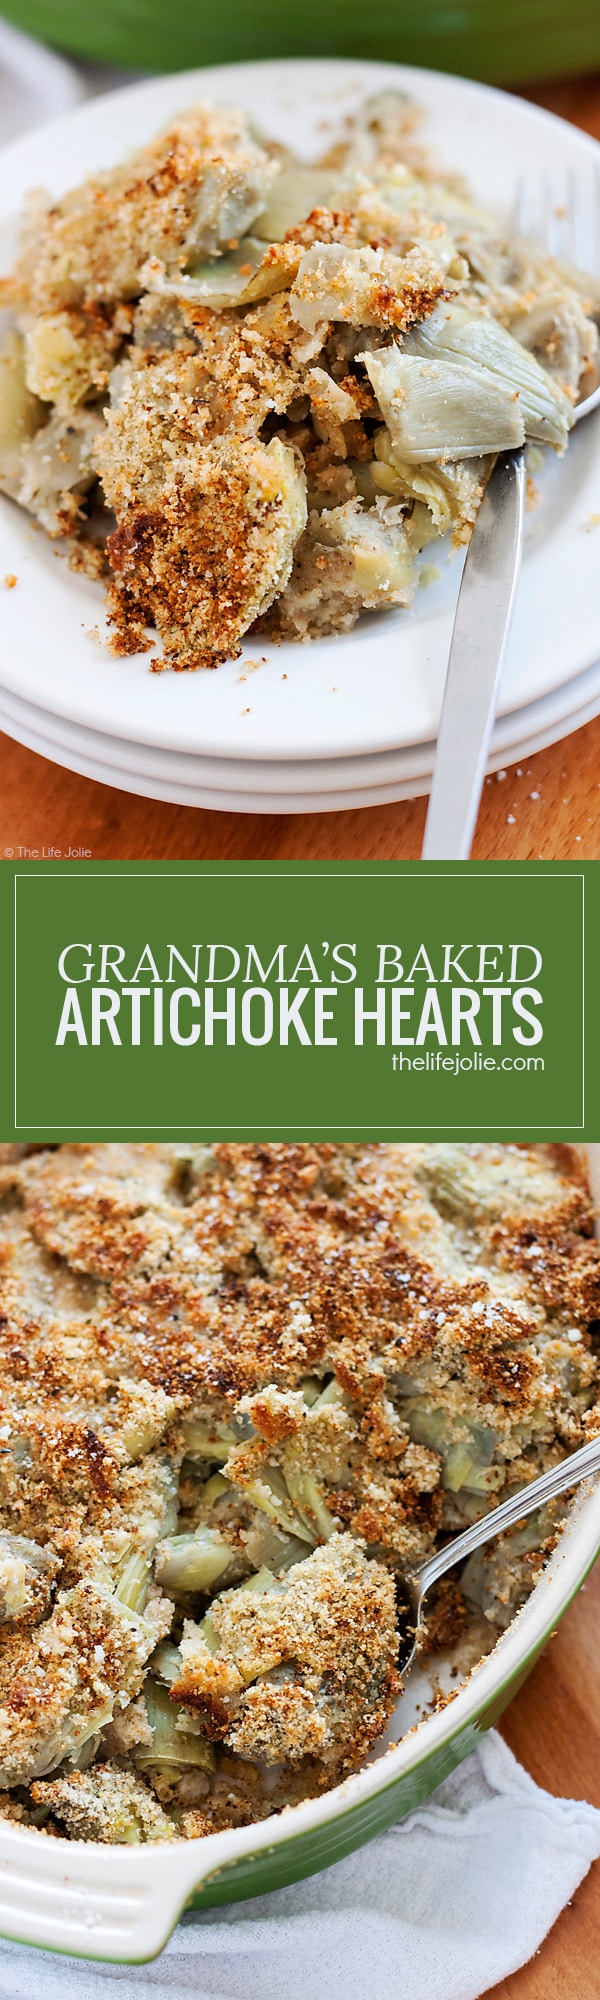 Grandma's Baked Artichoke Hearts is one of my favorite holiday side dishes. This is such an easy recipe and can even be made ahead of time. This is made with Parmesan cheese, bread crumbs and garlic powder and is a delicious addition to your Thanksgiving or Christmas dinner!